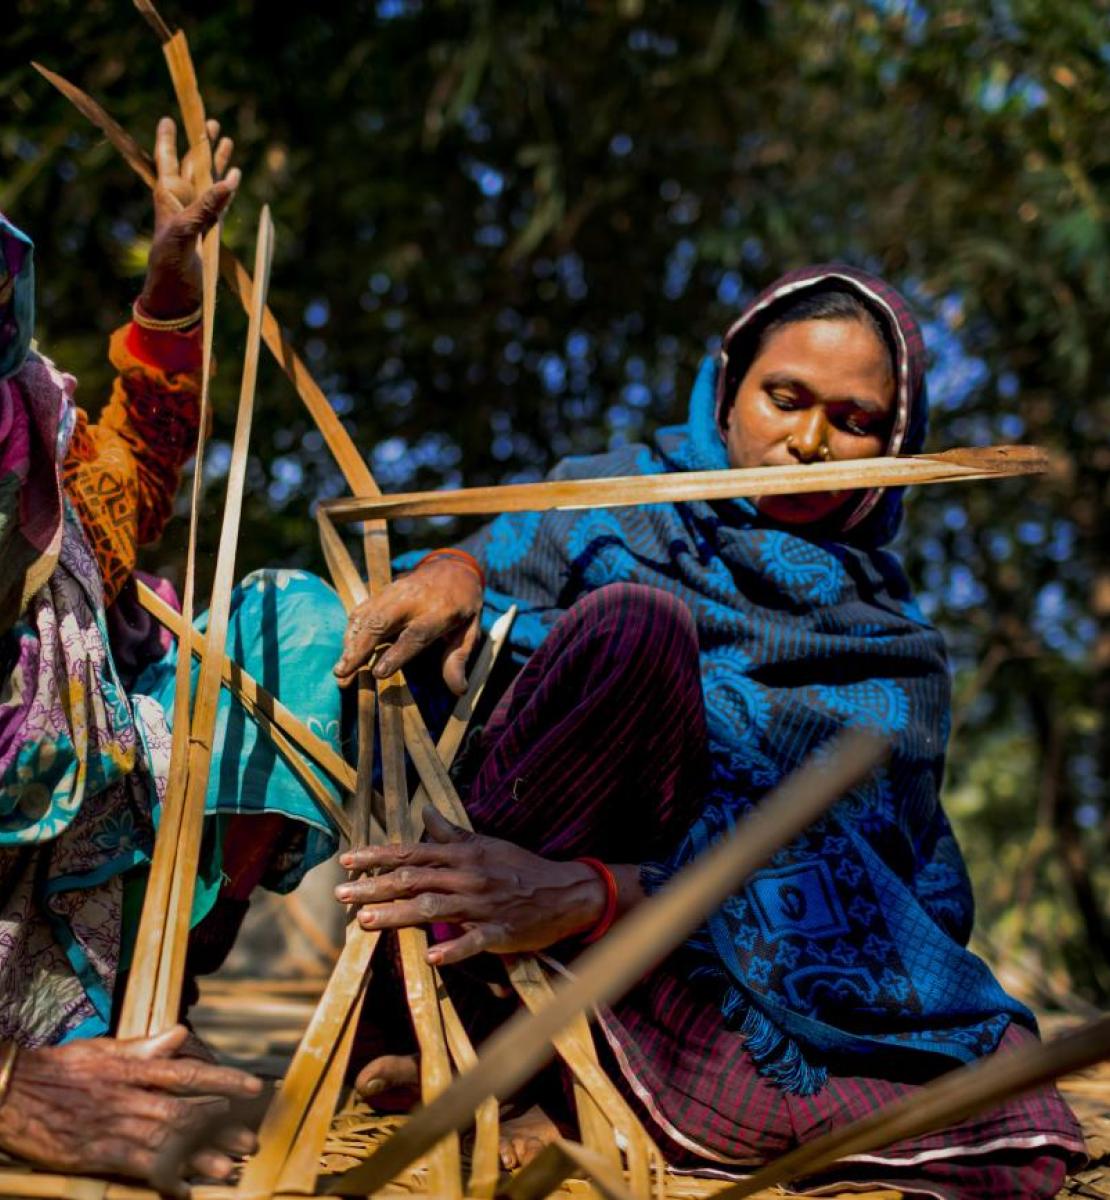 Women in colorful scarves work with wood in Bangladesh.